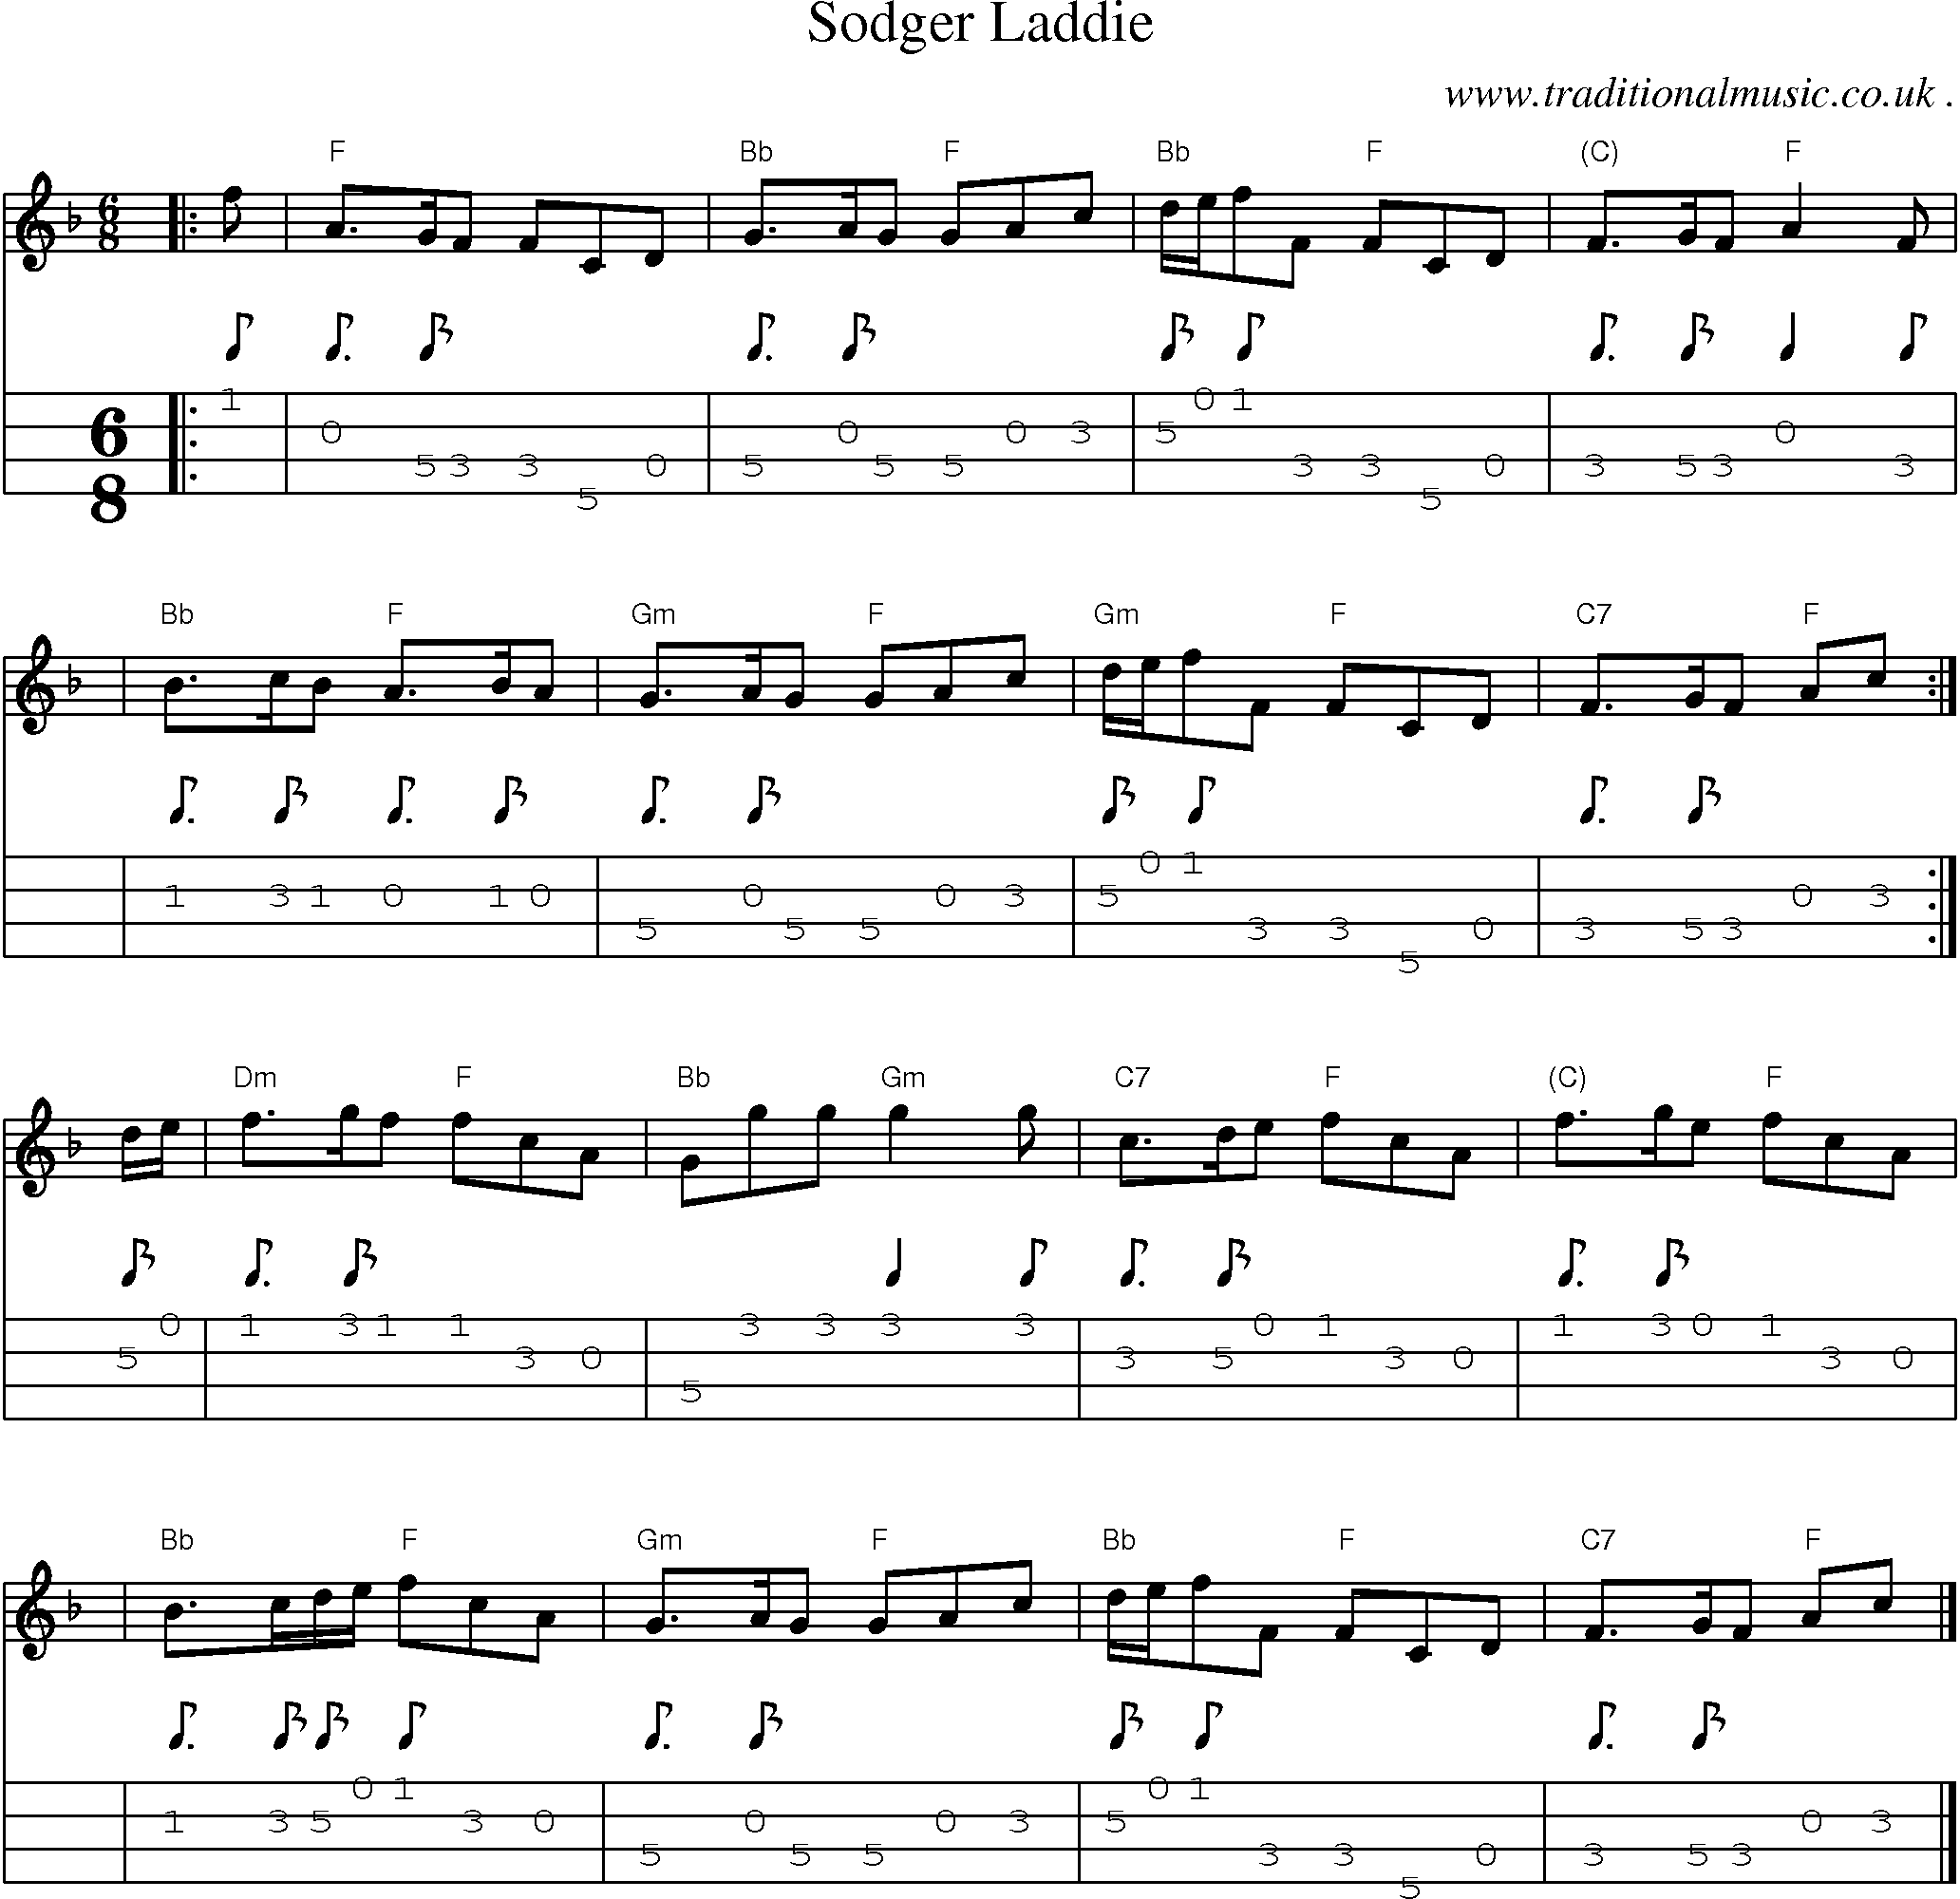 Sheet-music  score, Chords and Mandolin Tabs for Sodger Laddie